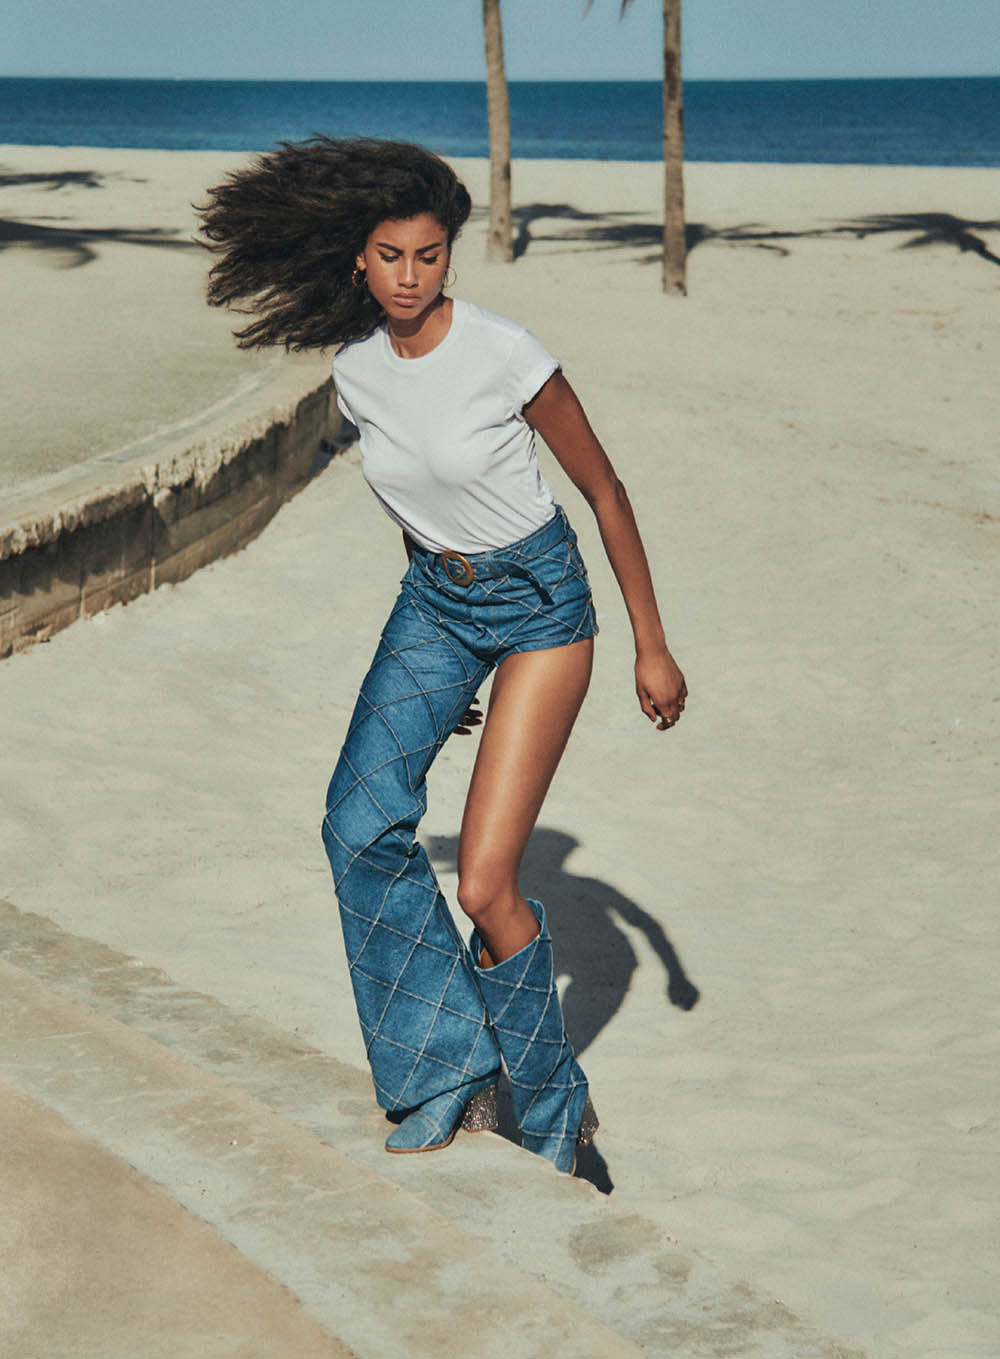 Imaan Hammam by Chris Colls for Elle US May 2020